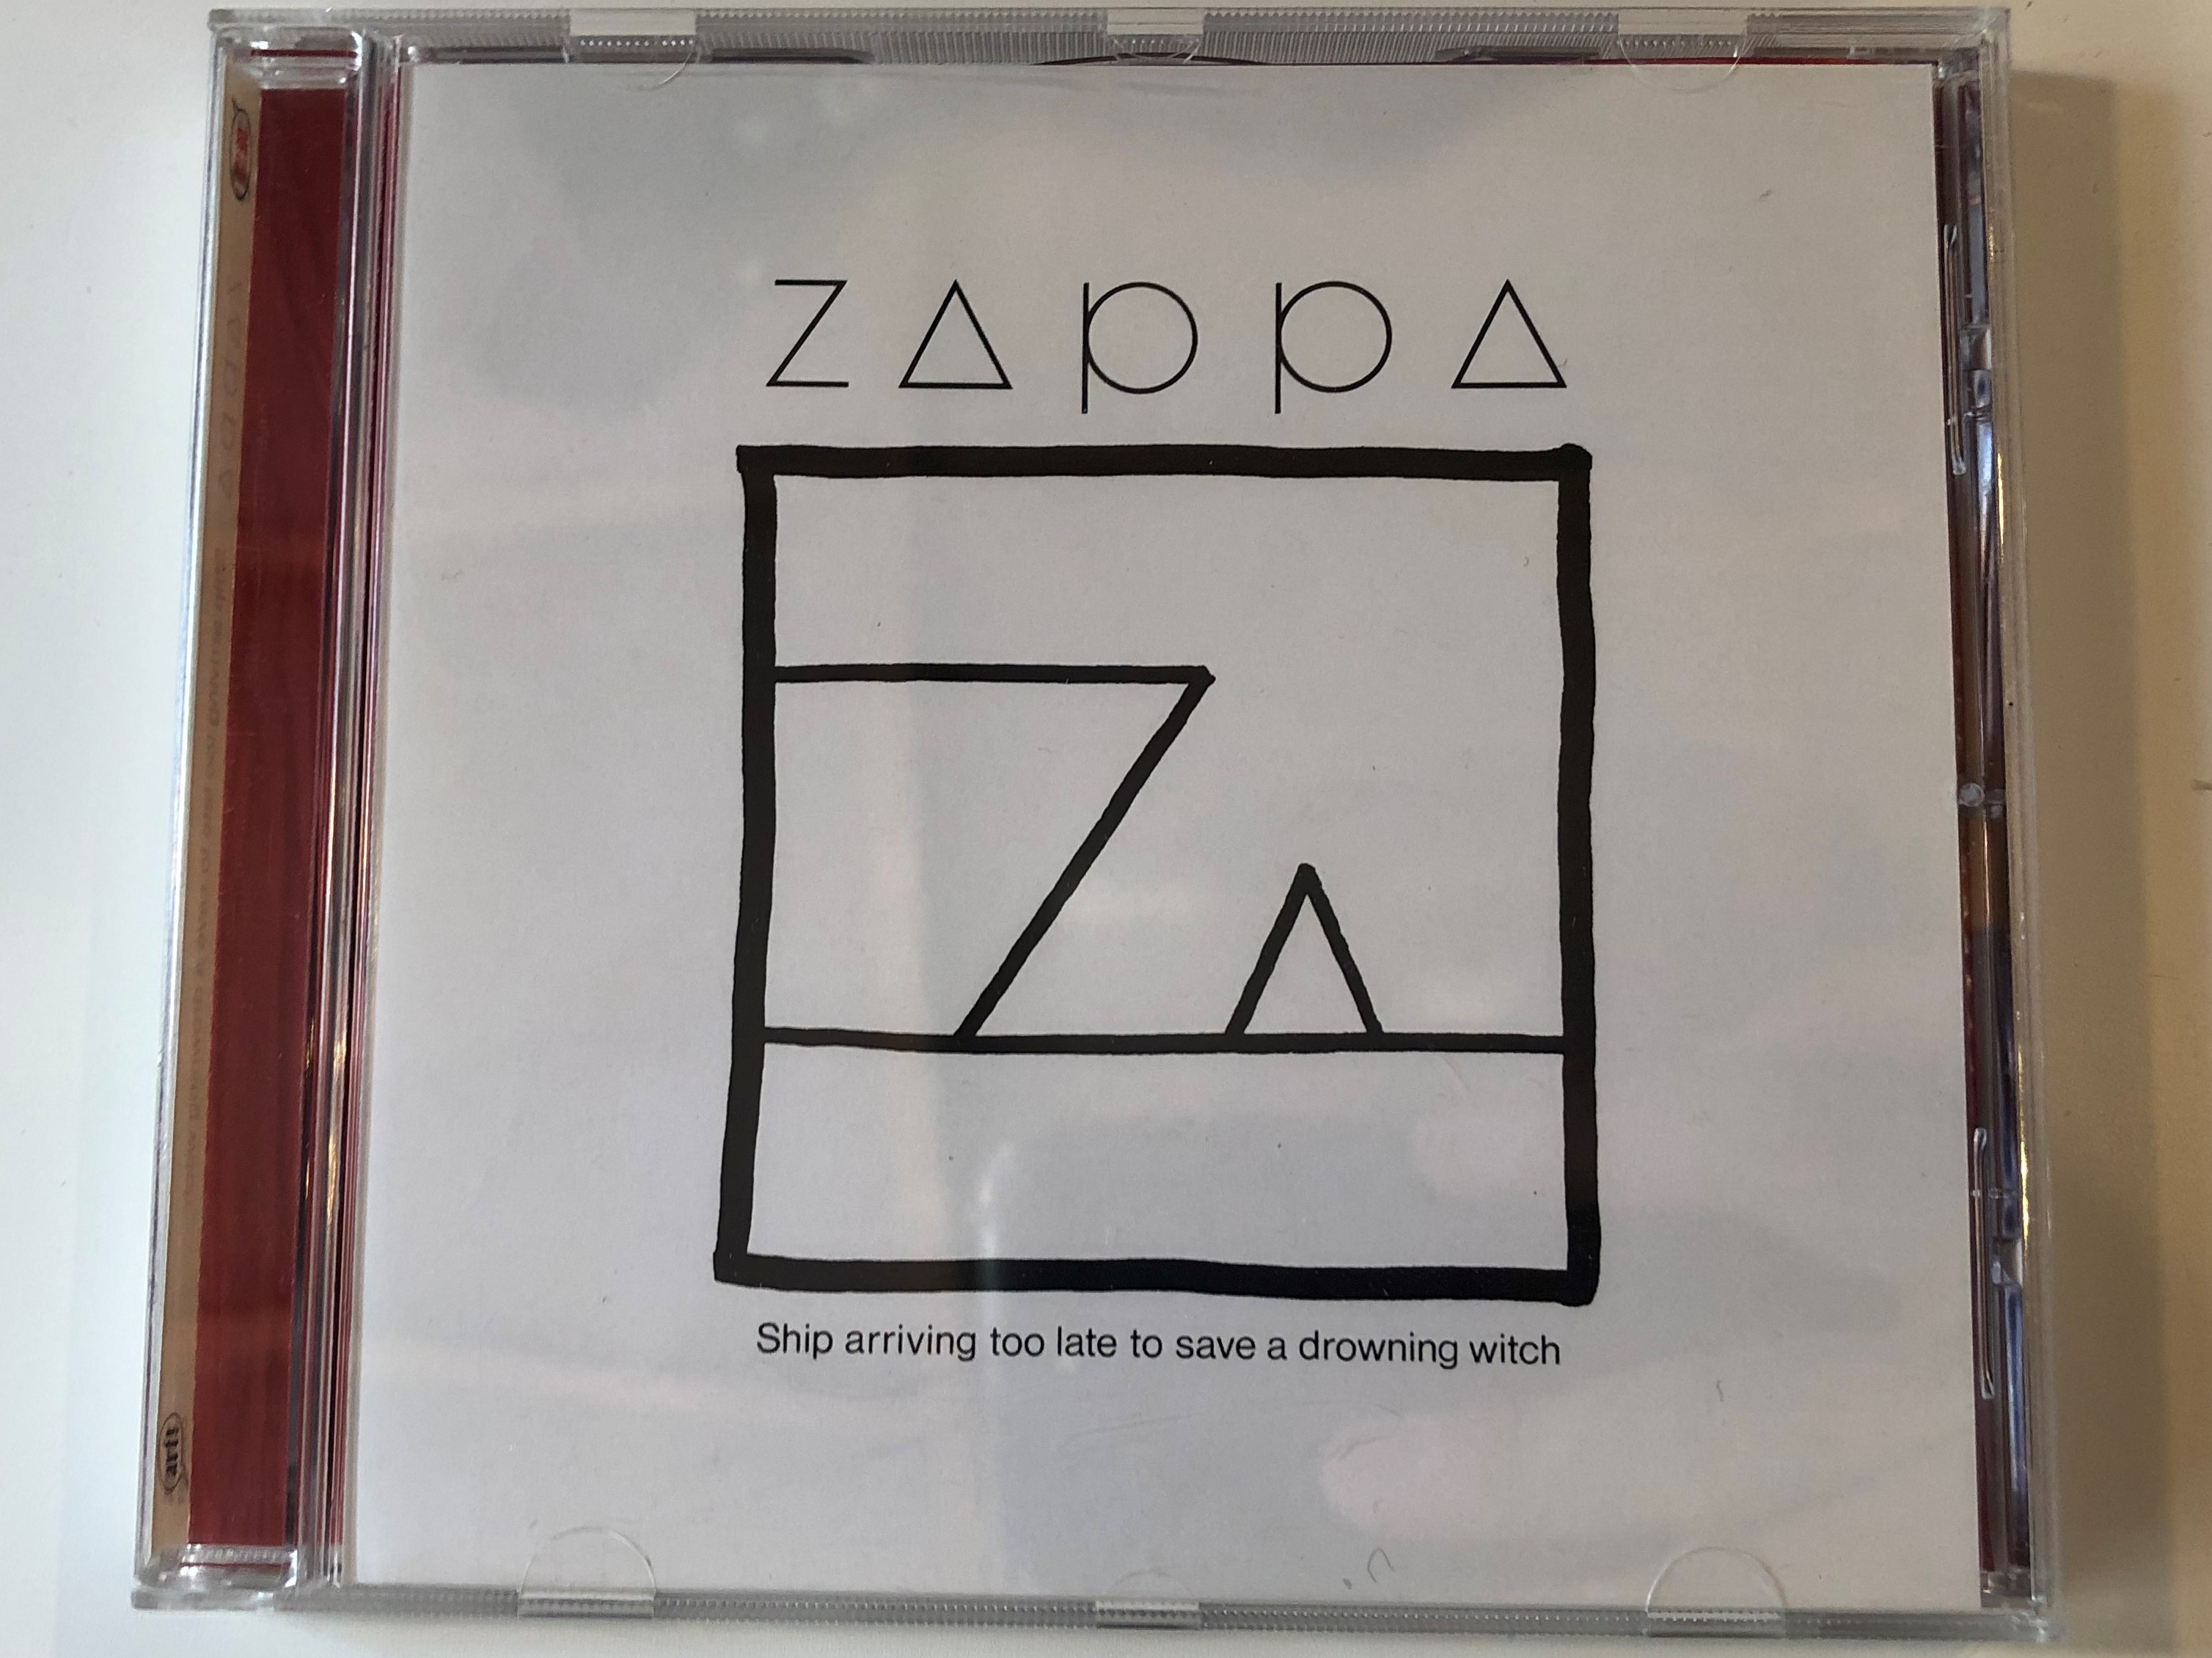 zappa-ship-arriving-too-late-to-save-a-drowning-witch-zappa-records-audio-cd-2012-0238652-1-.jpg